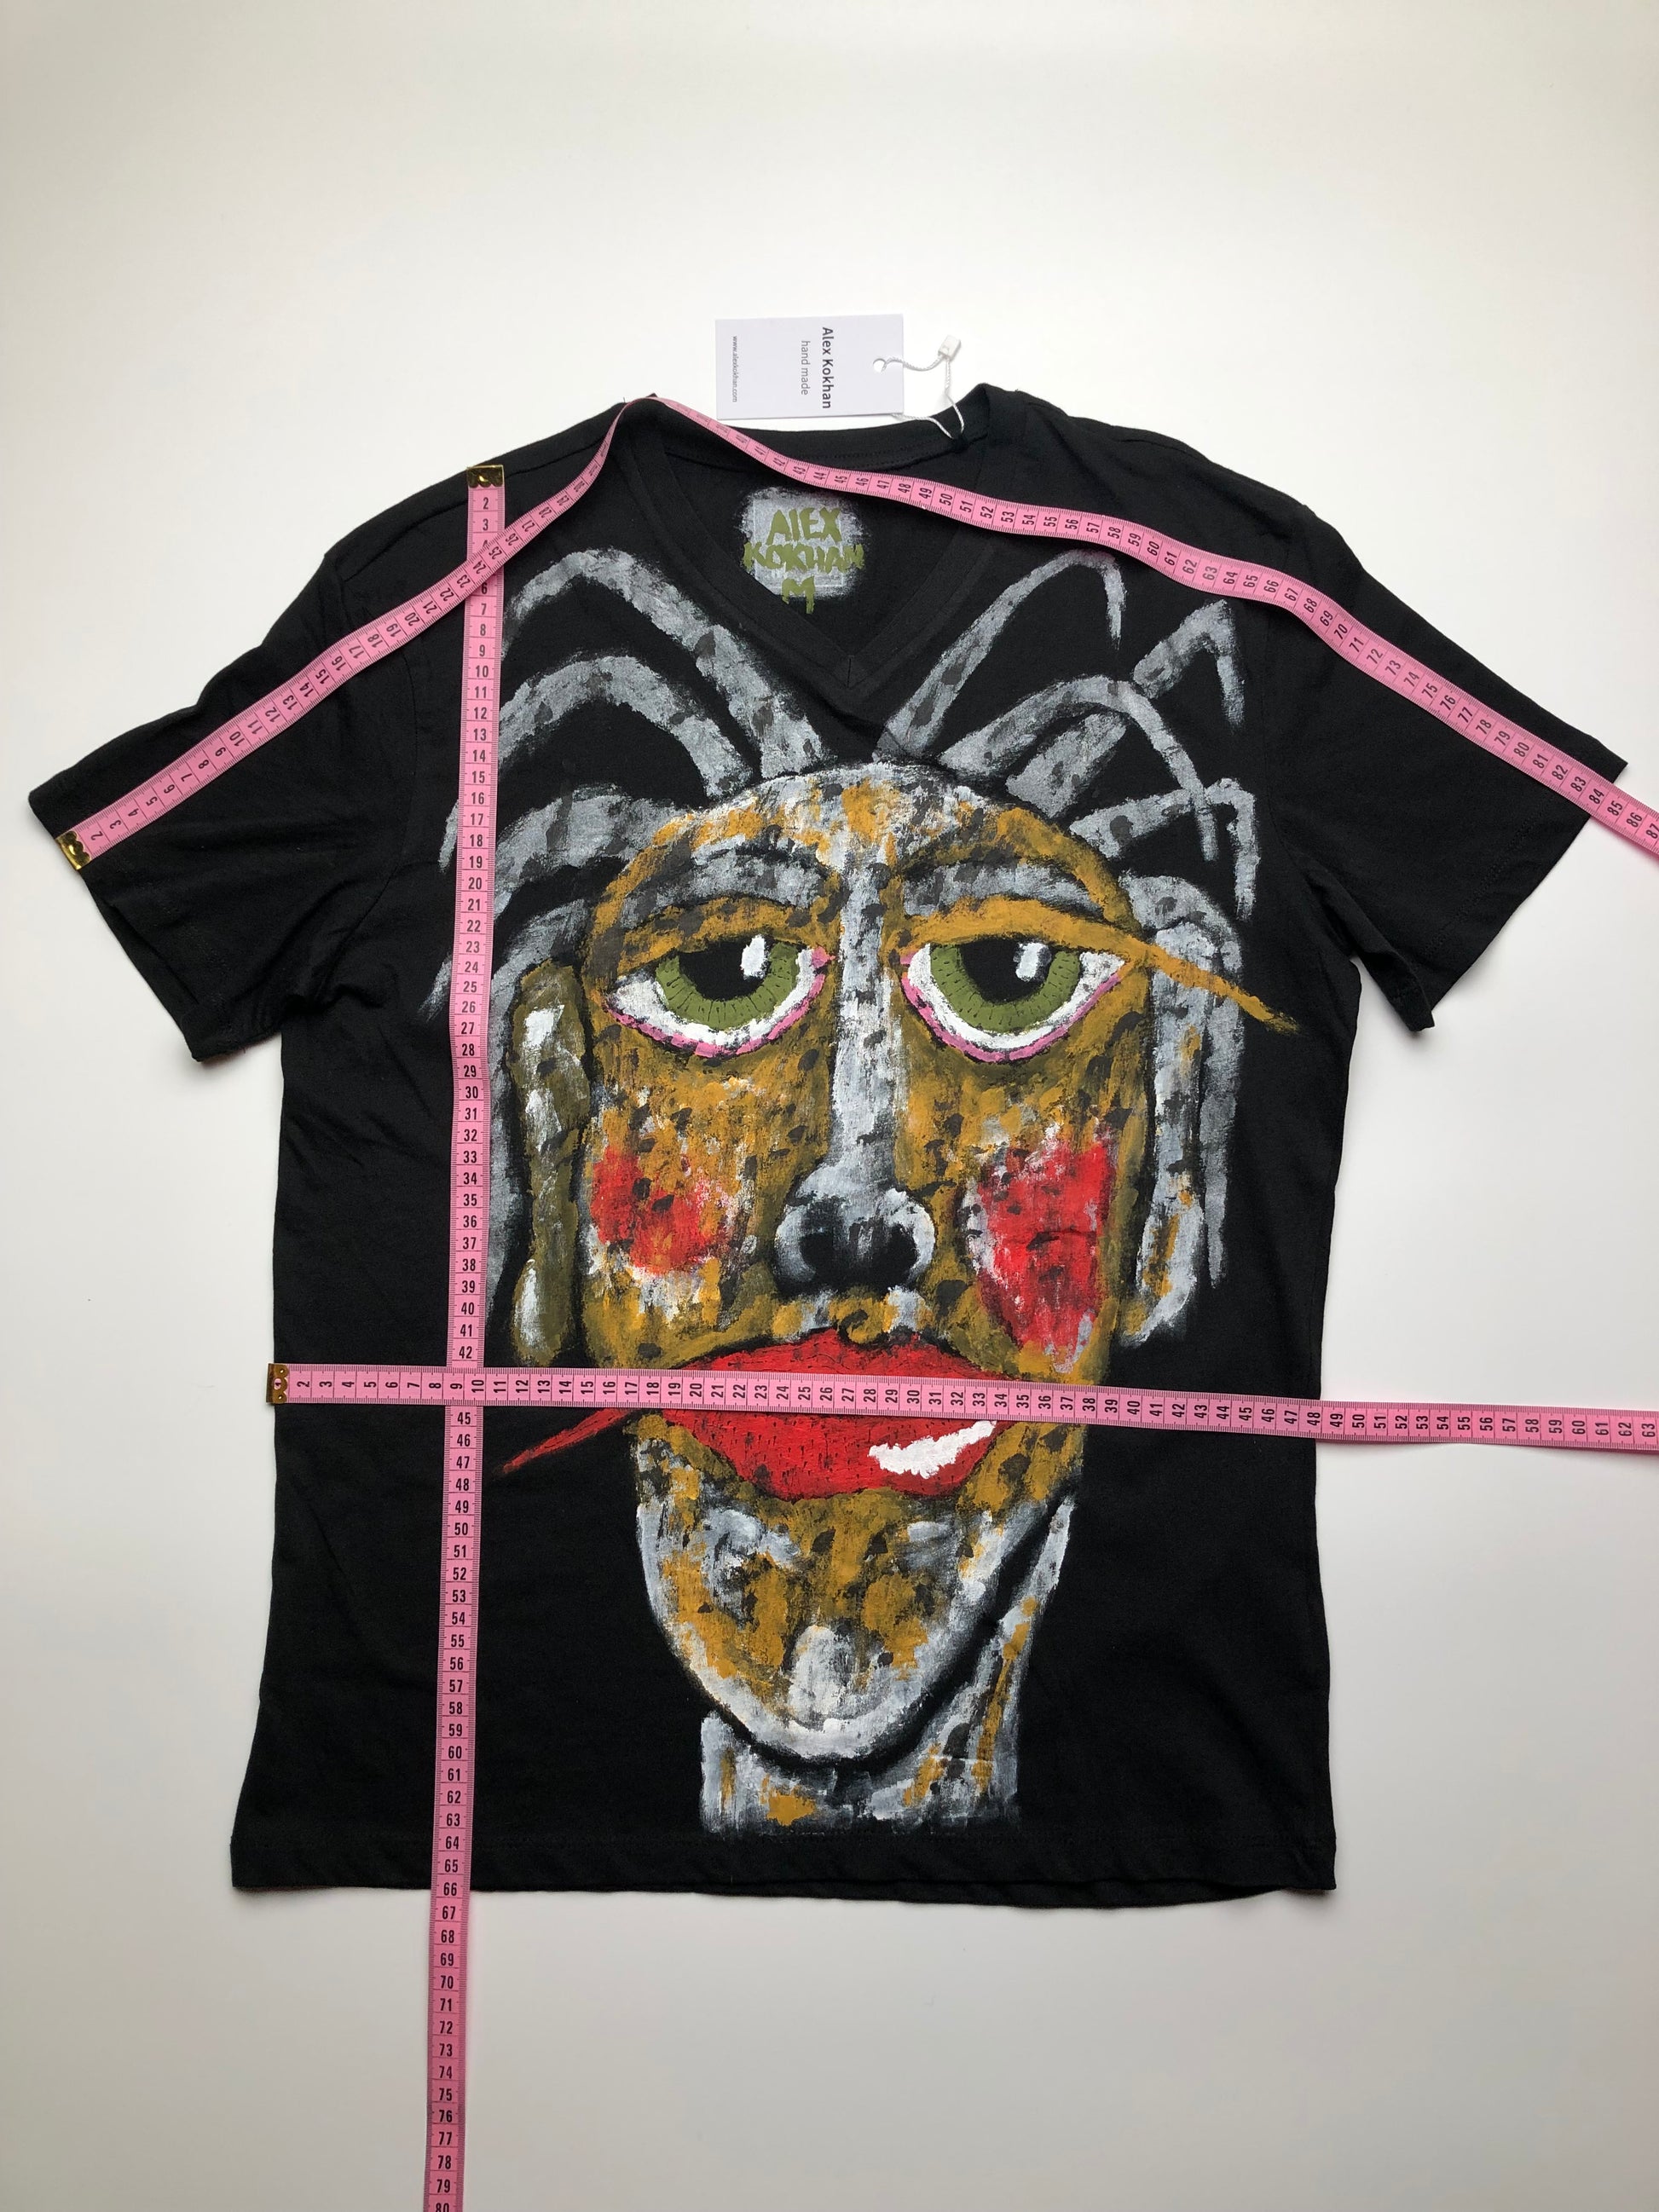 Hand-painted with acrylics on a T-shirt in the only size M, length 69 cm, width 47 cm.